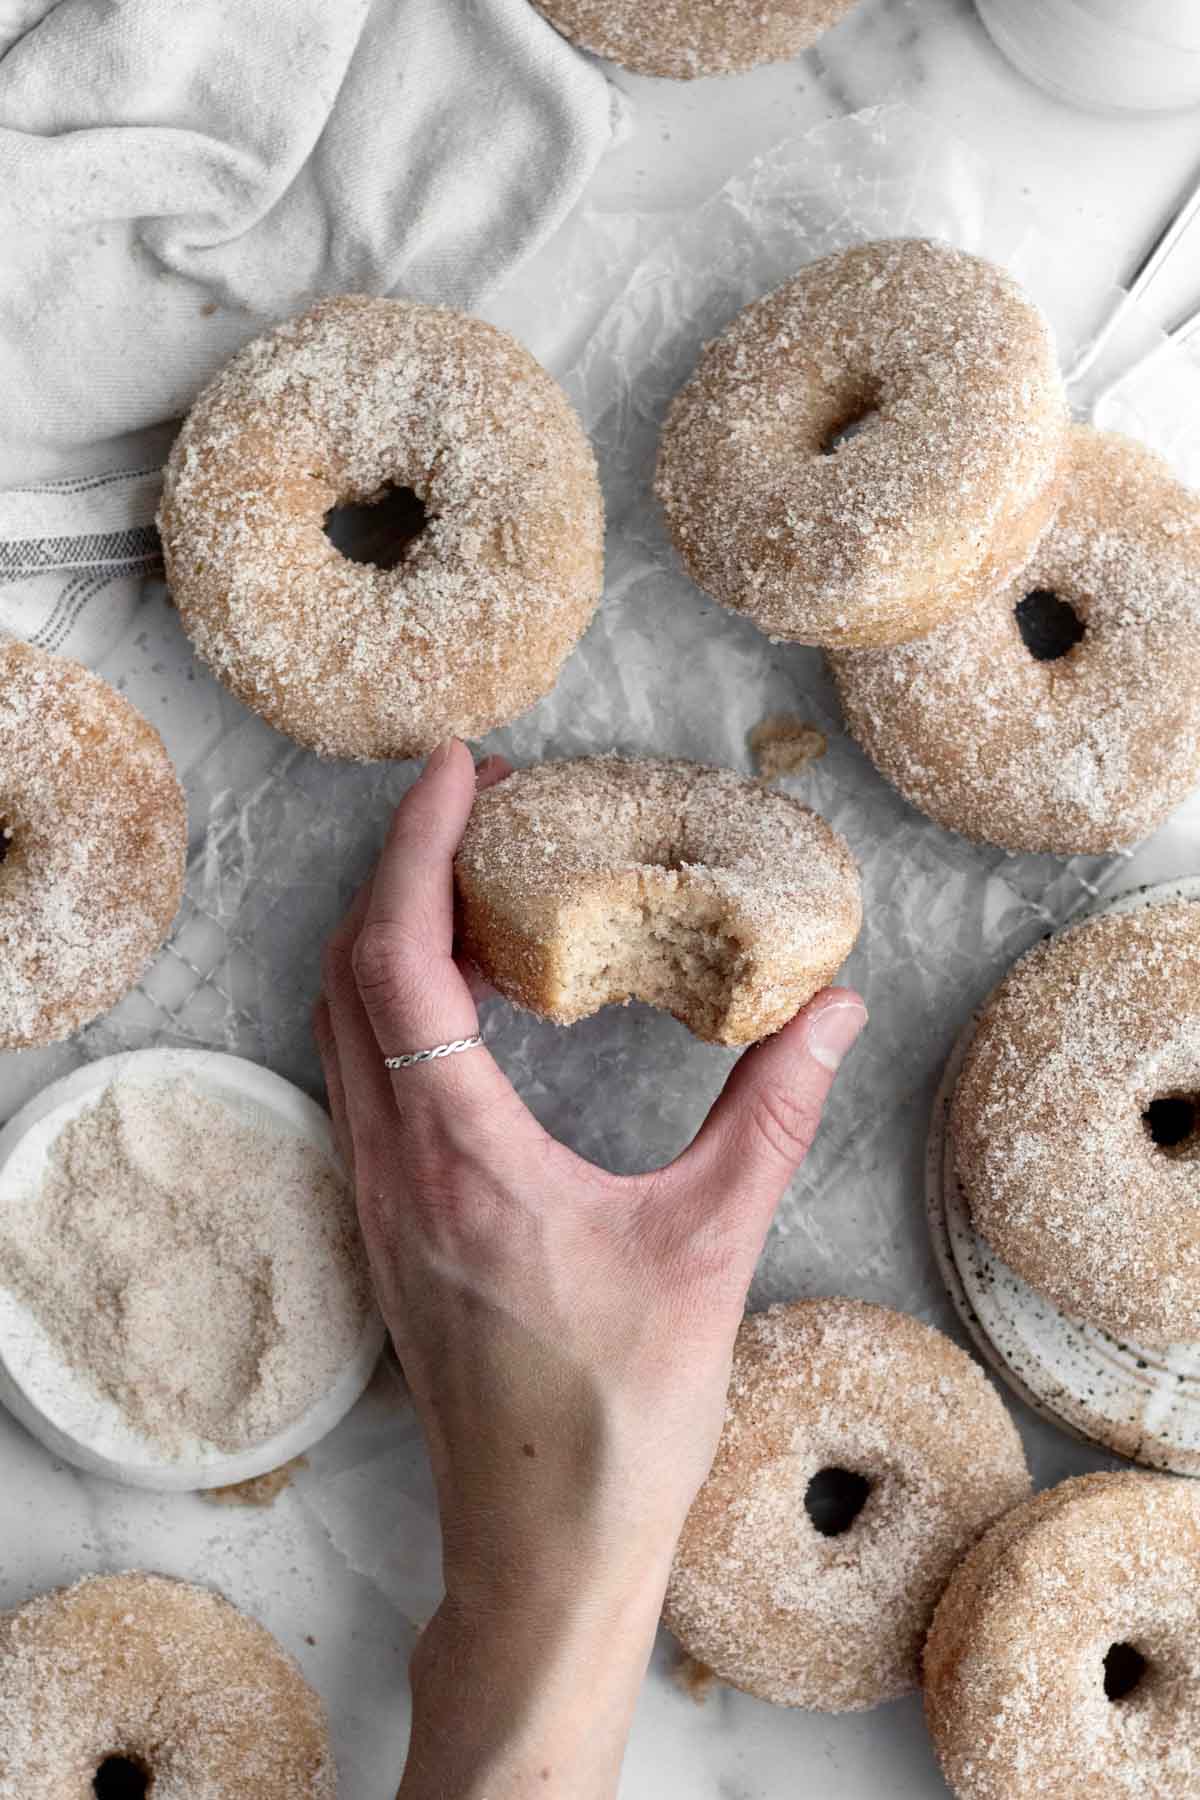 In a crowded table of donuts, a hand holds a bite one.